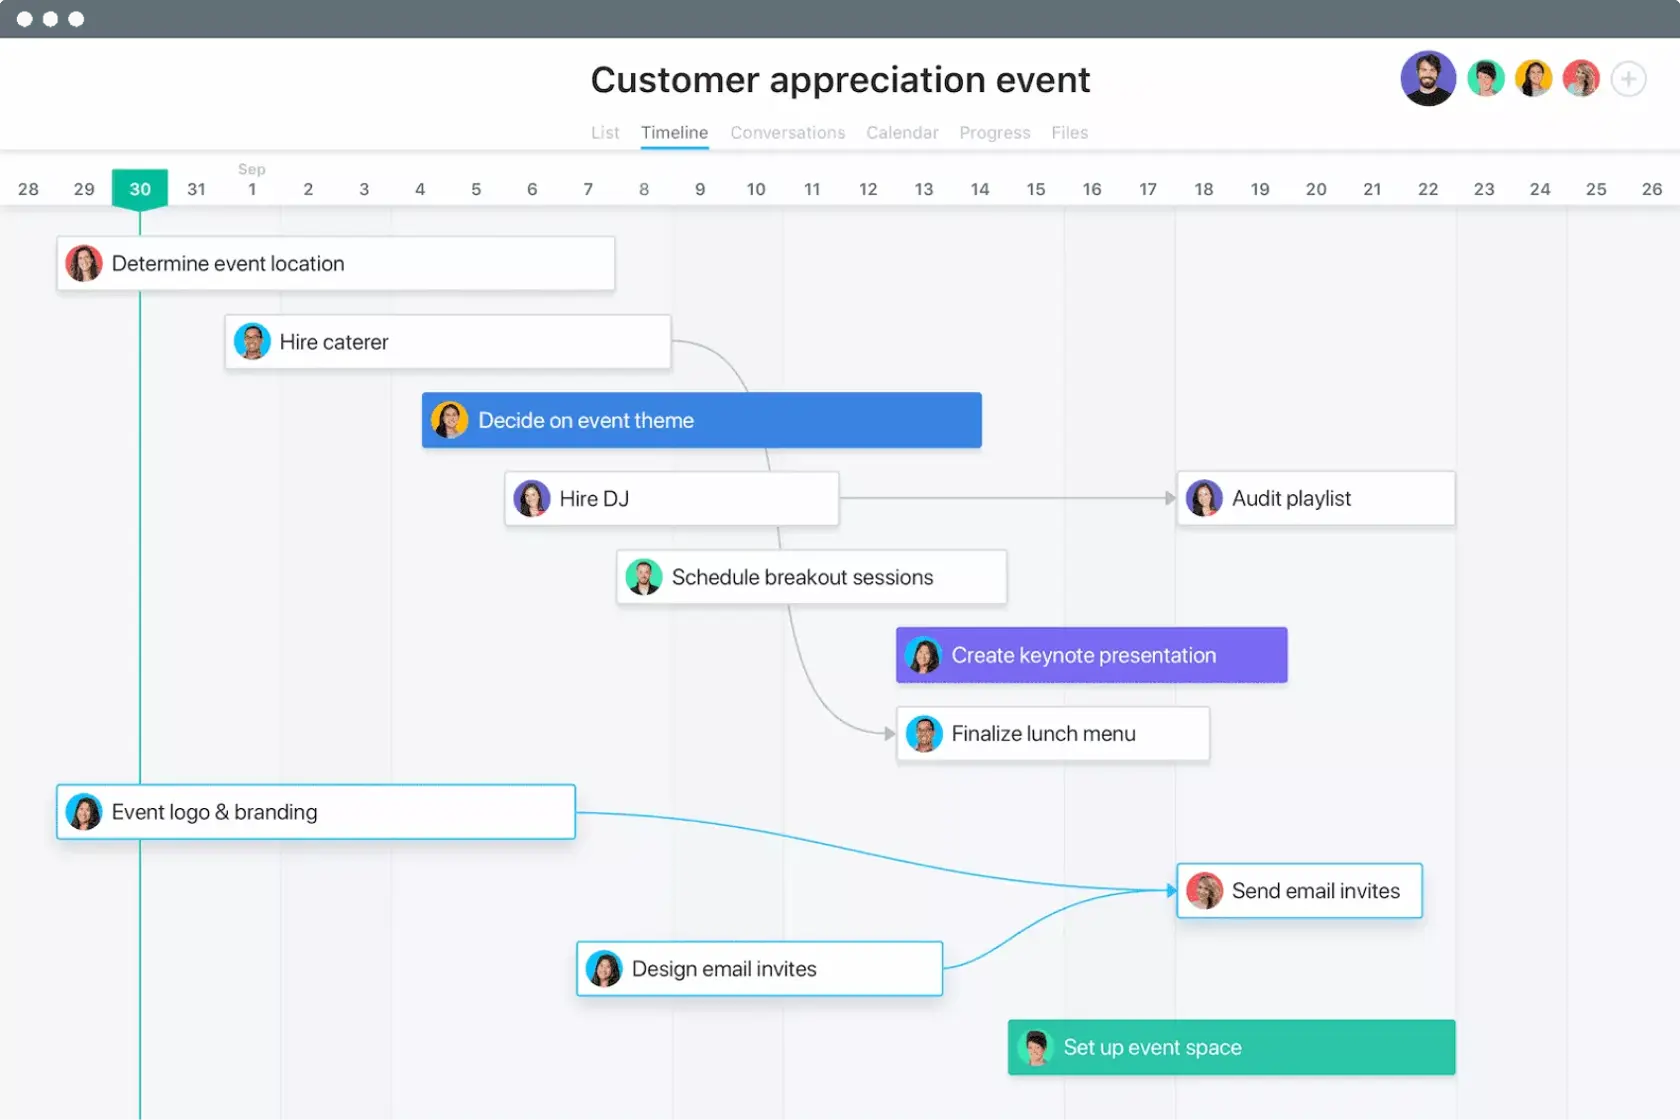 [Old Product UI] Customer appreciation event project in Asana (Timeline)